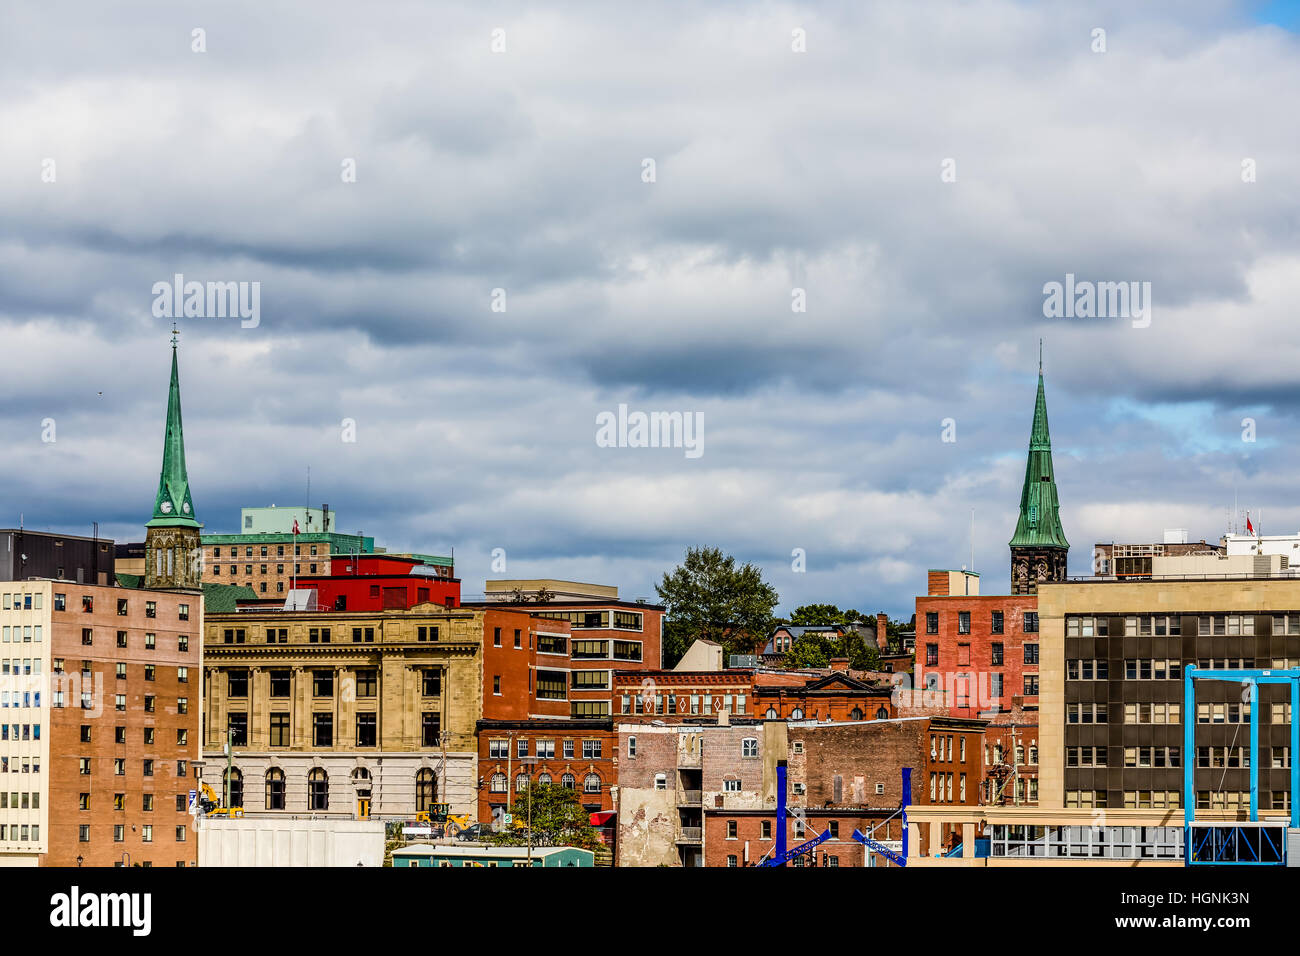 Two green church steeples above old brick buildings in Saint John, New Brunswick, Canada Stock Photo